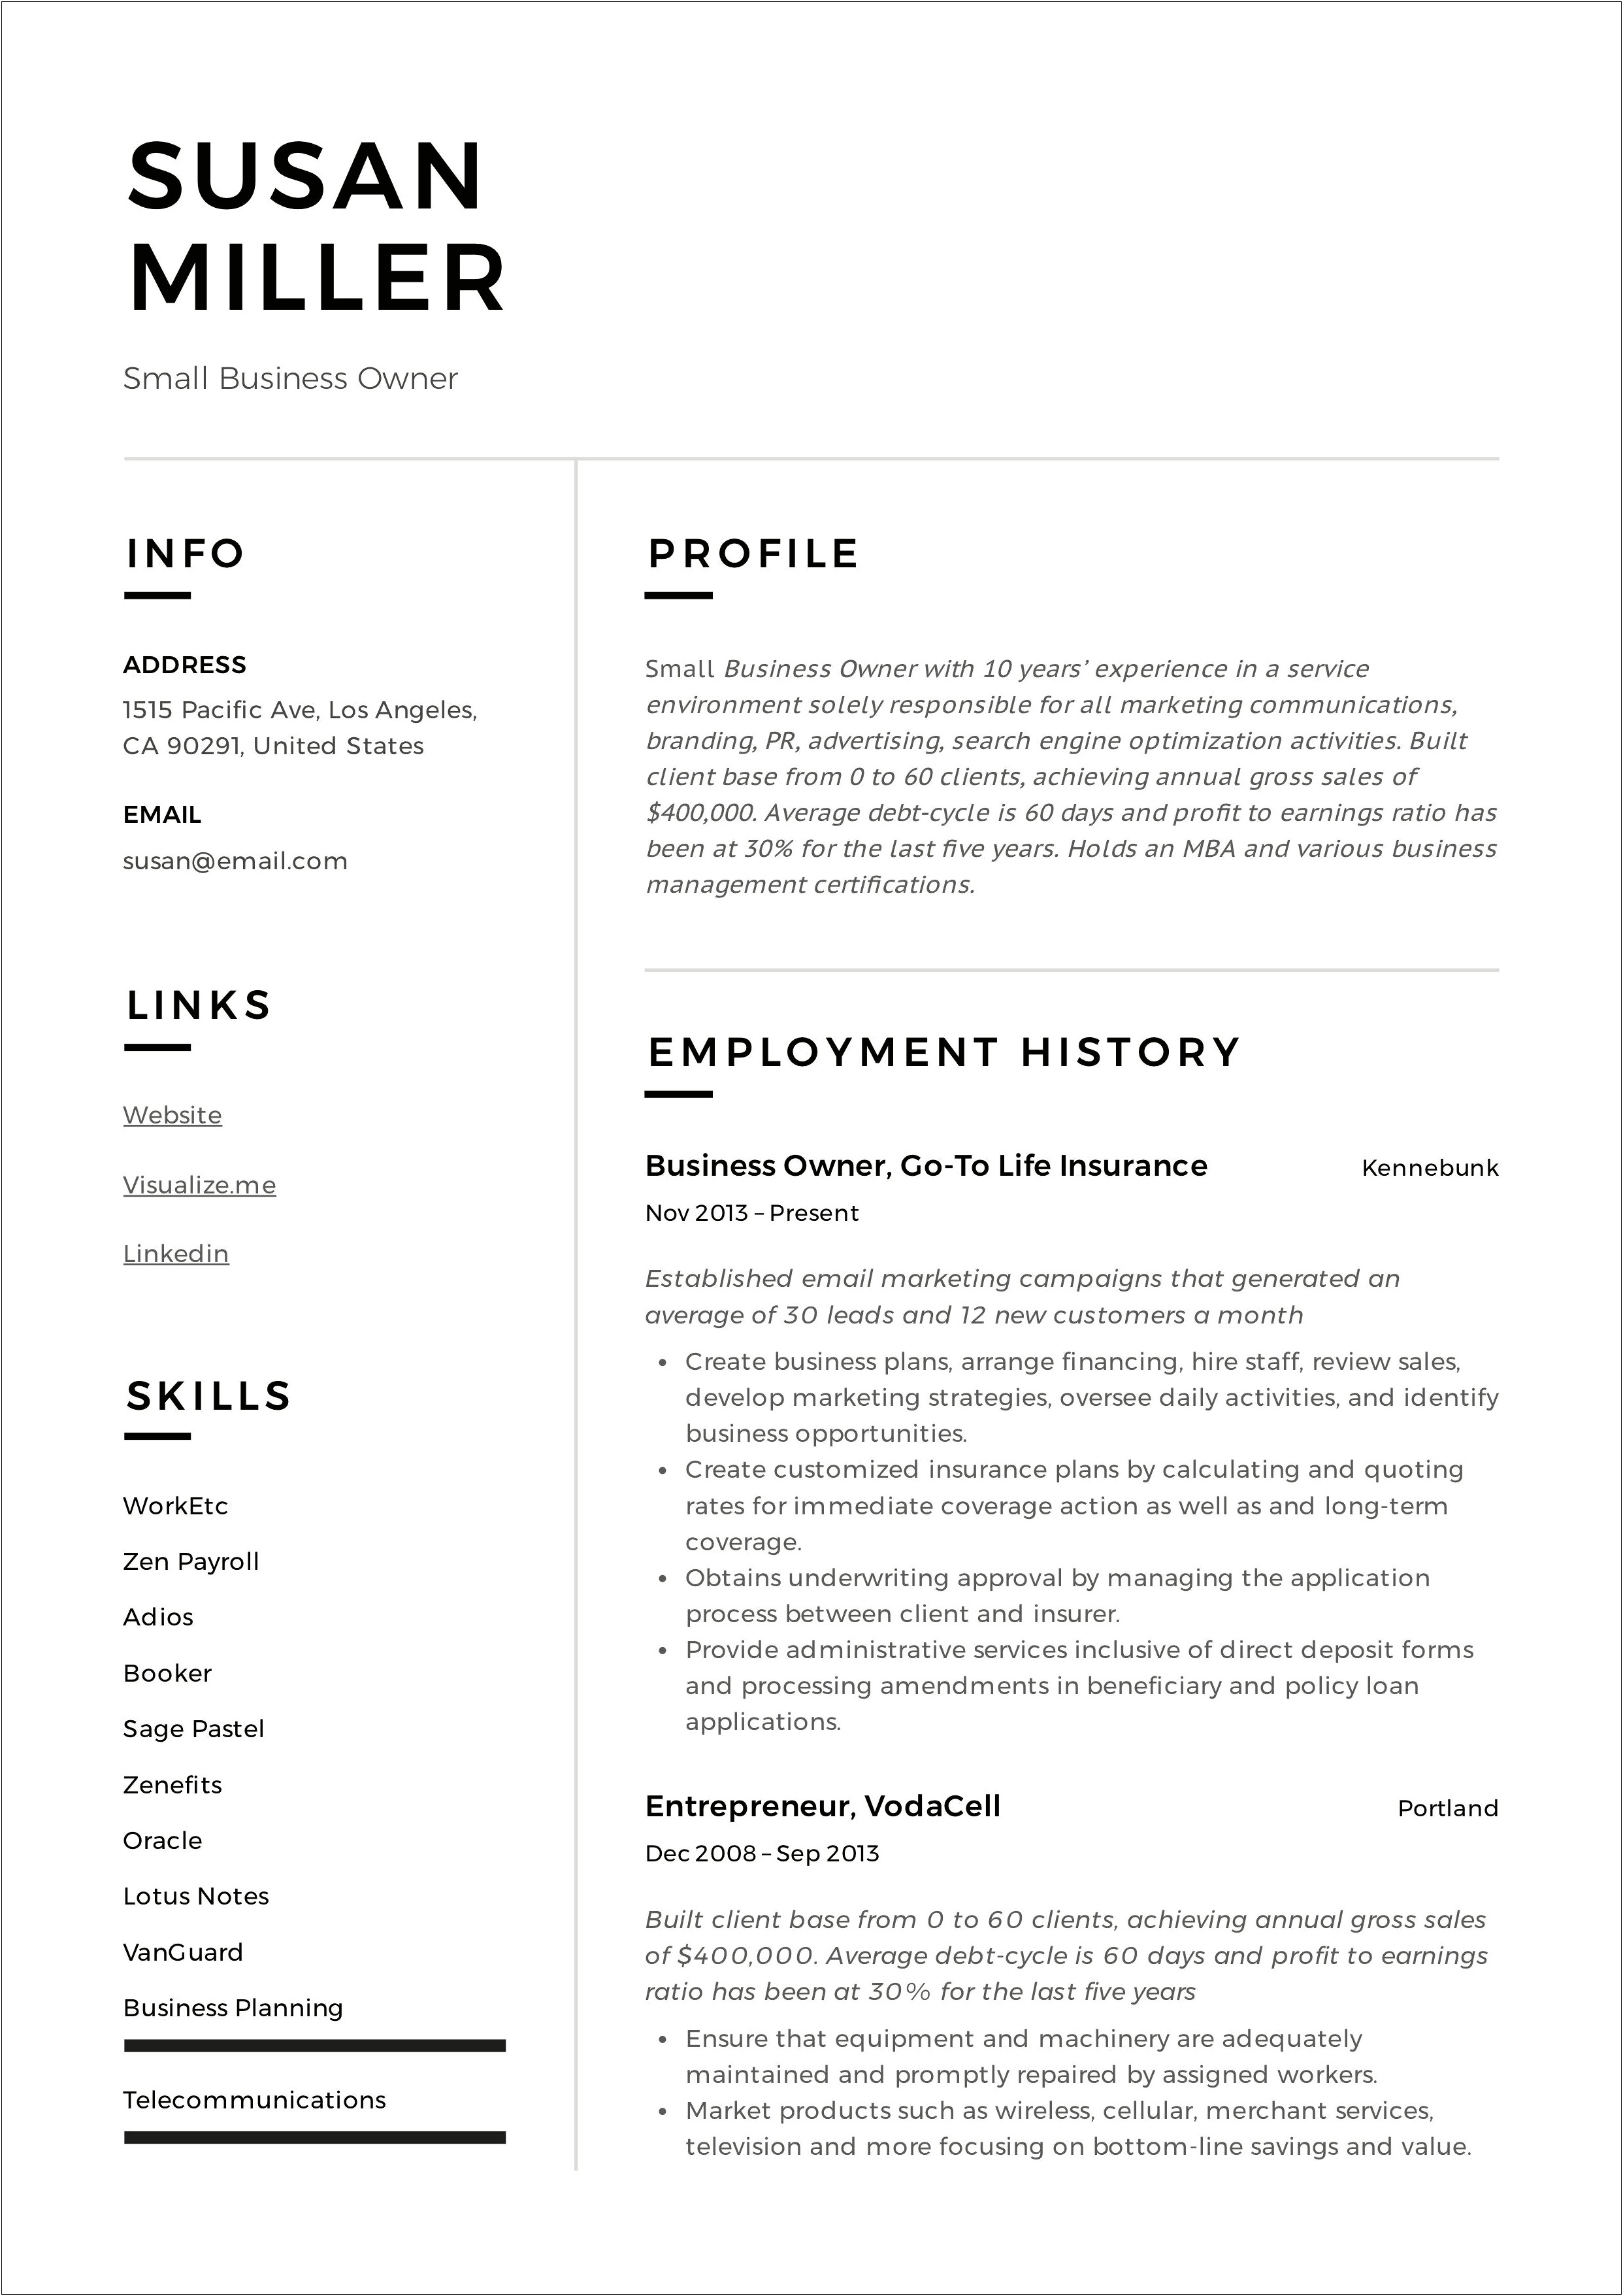 Small Business Owner Resume Sample